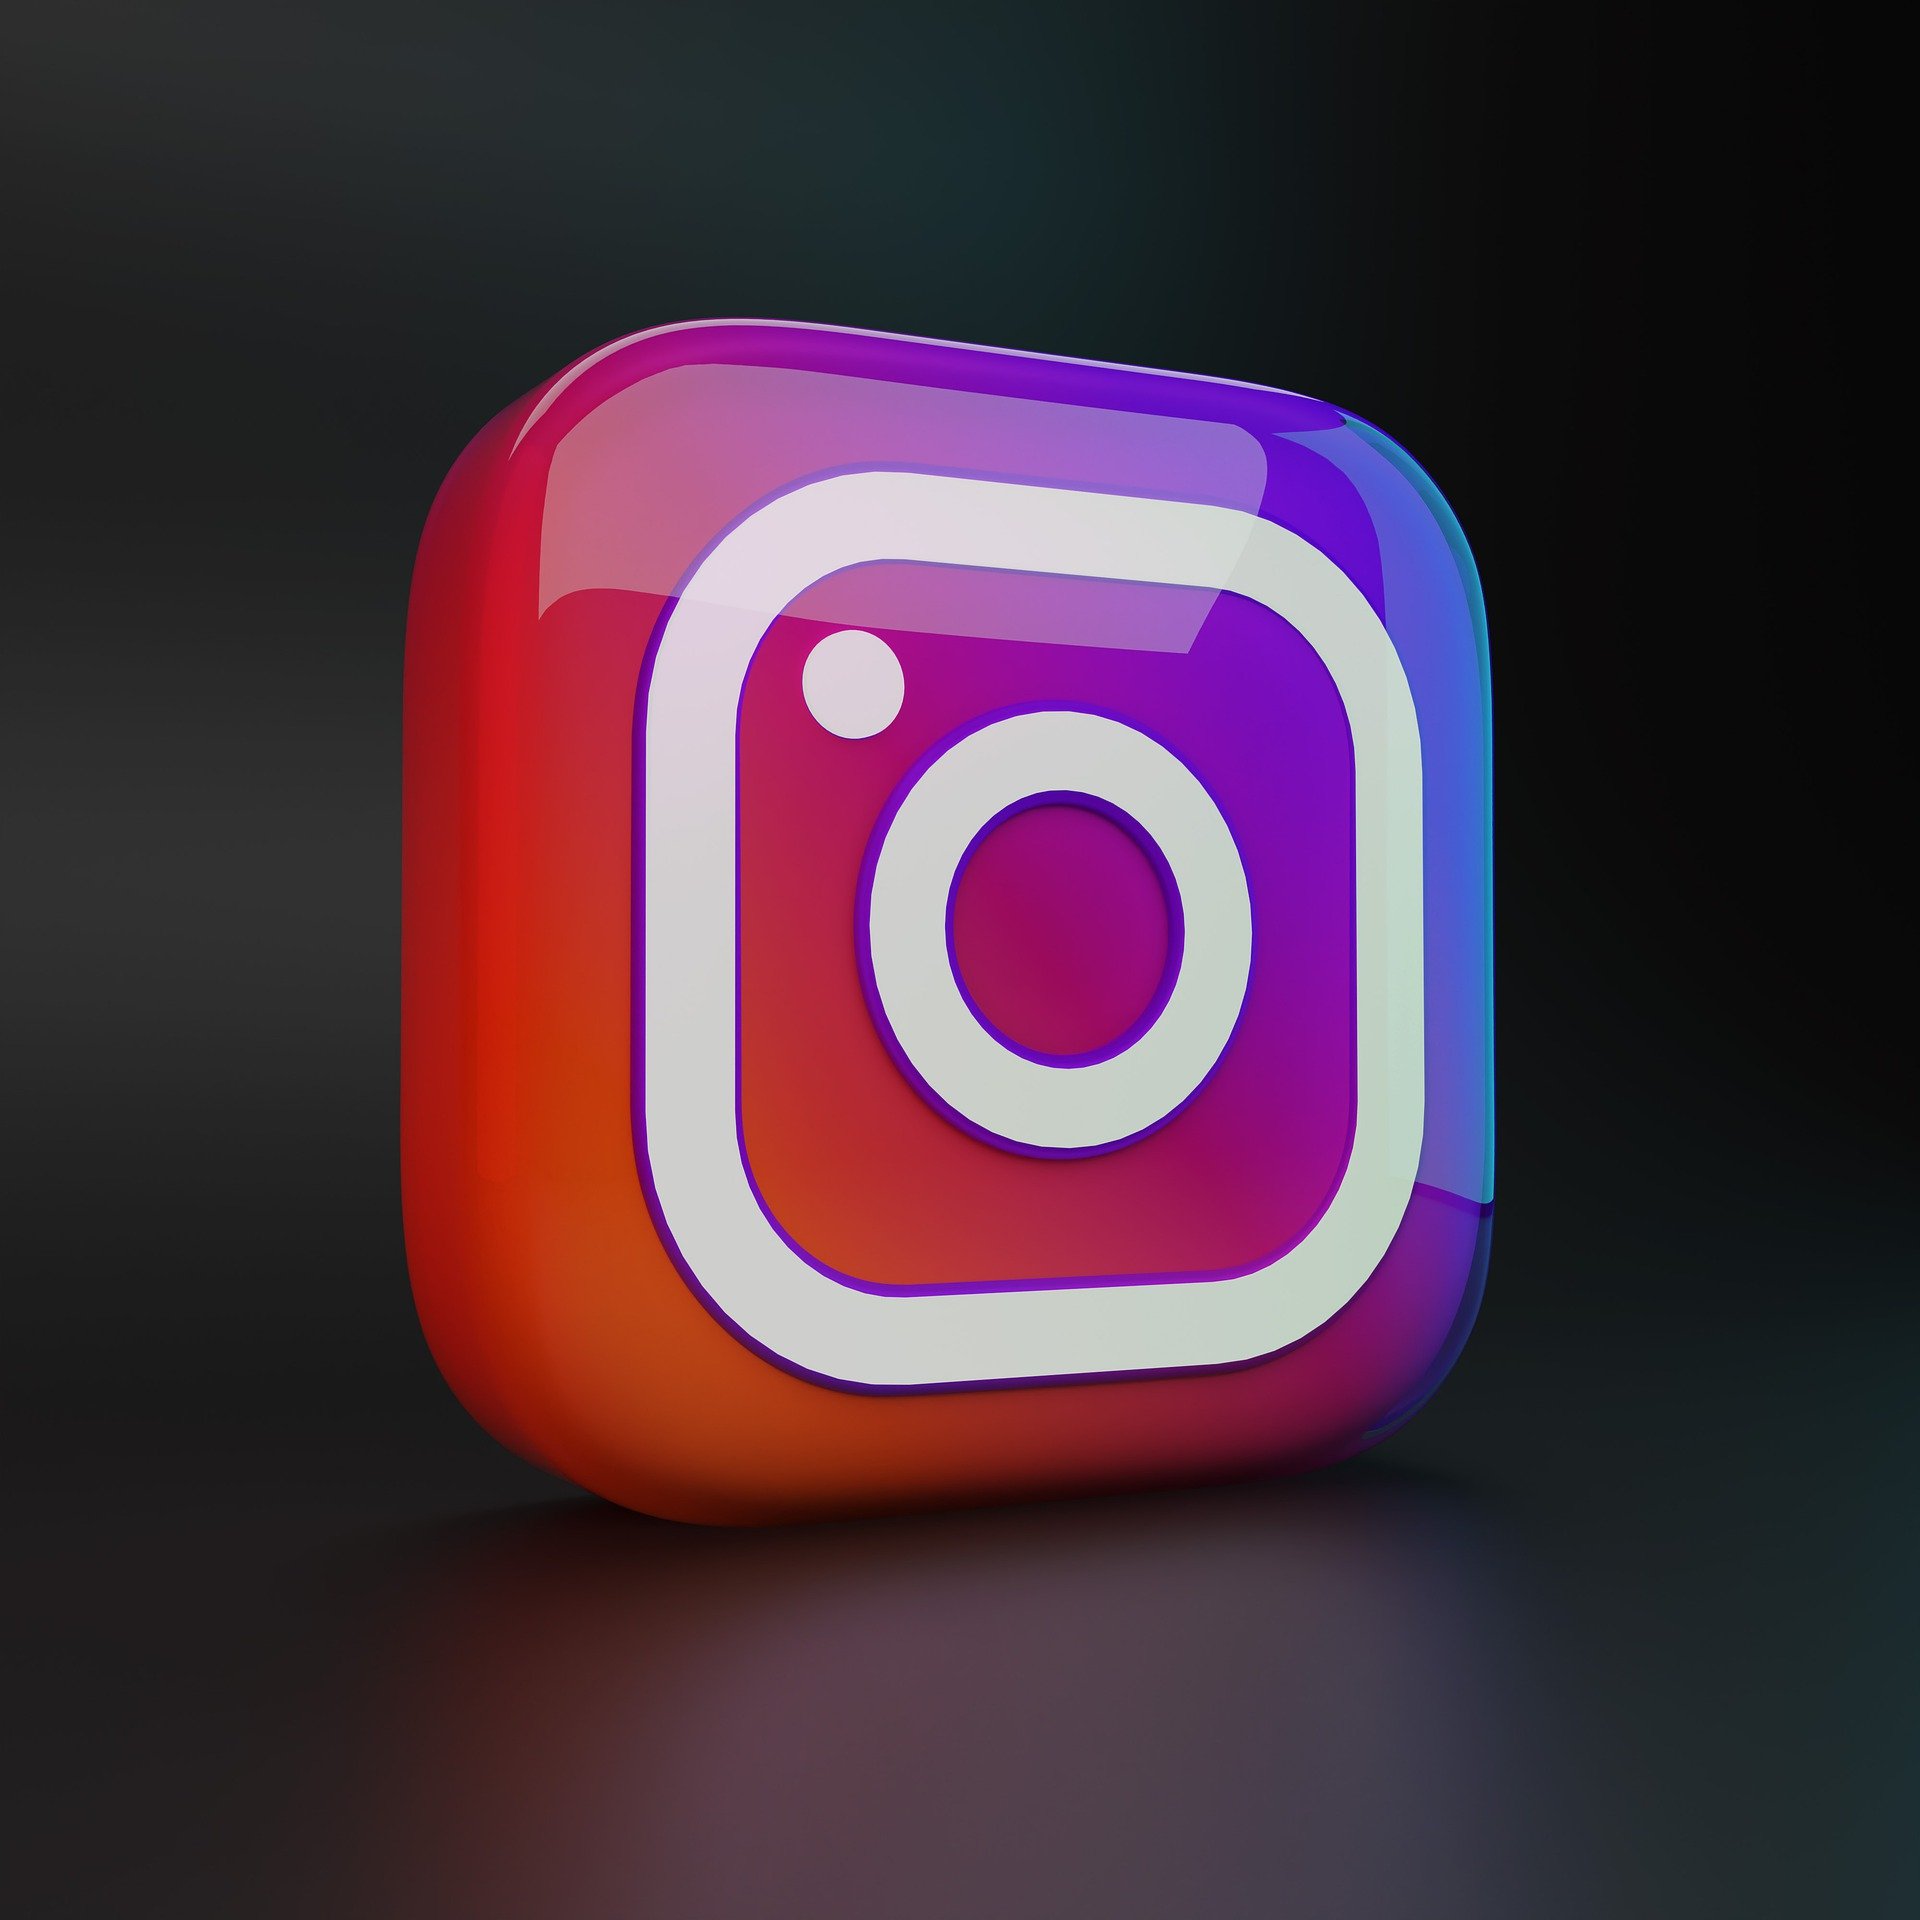 6 Pro Tips to Use Instagram to Promote Your New Brand